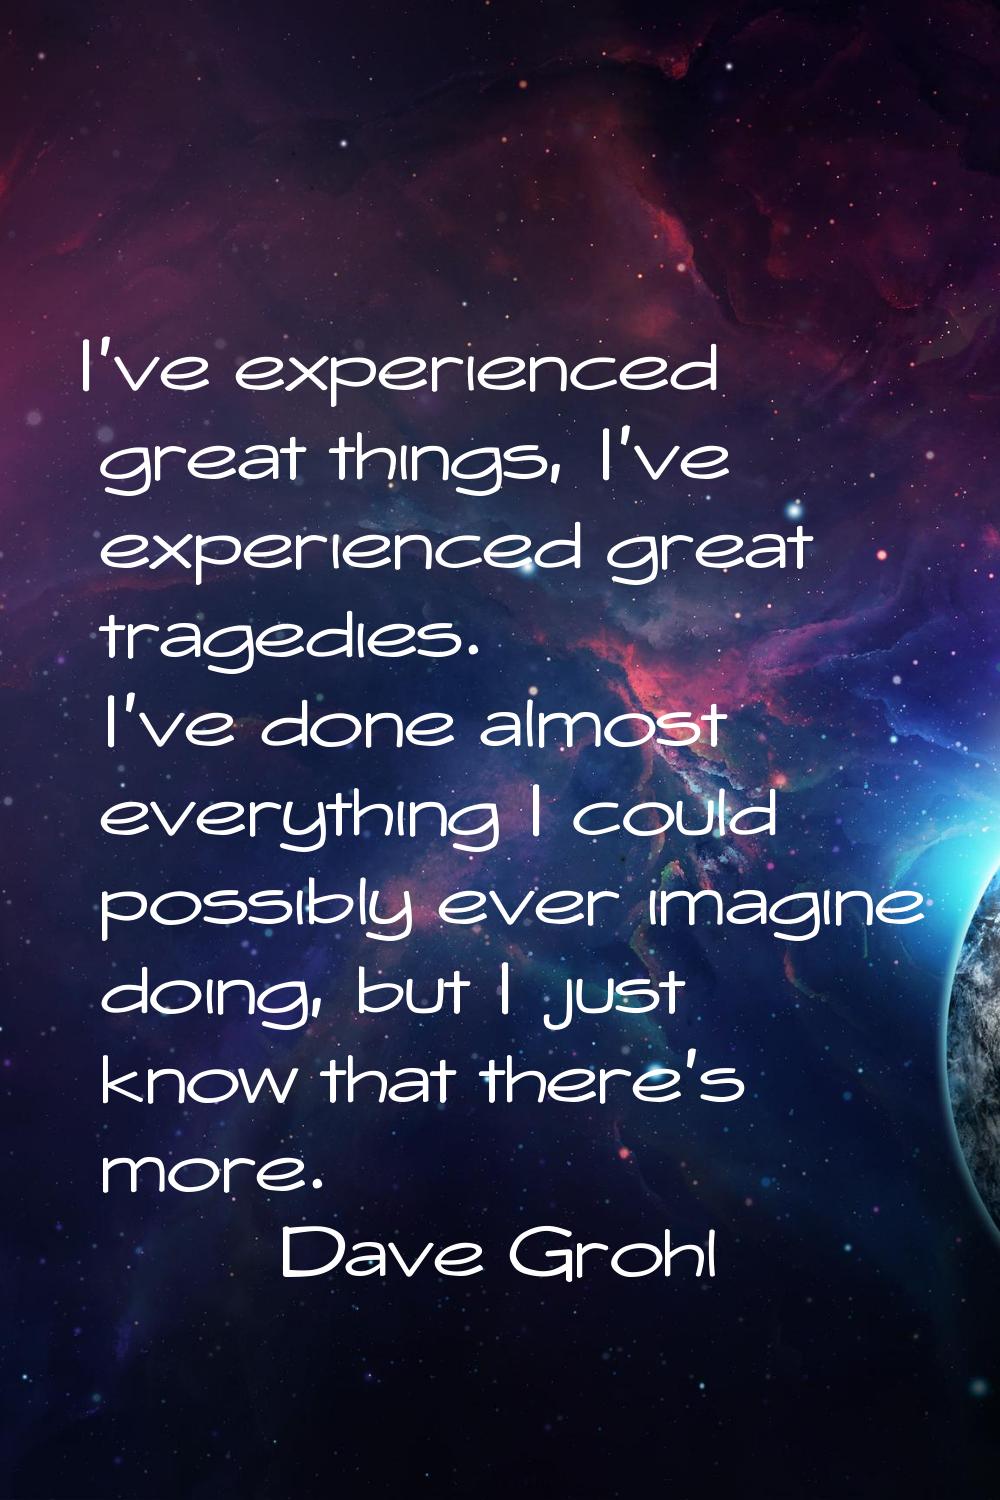 I've experienced great things, I've experienced great tragedies. I've done almost everything I coul